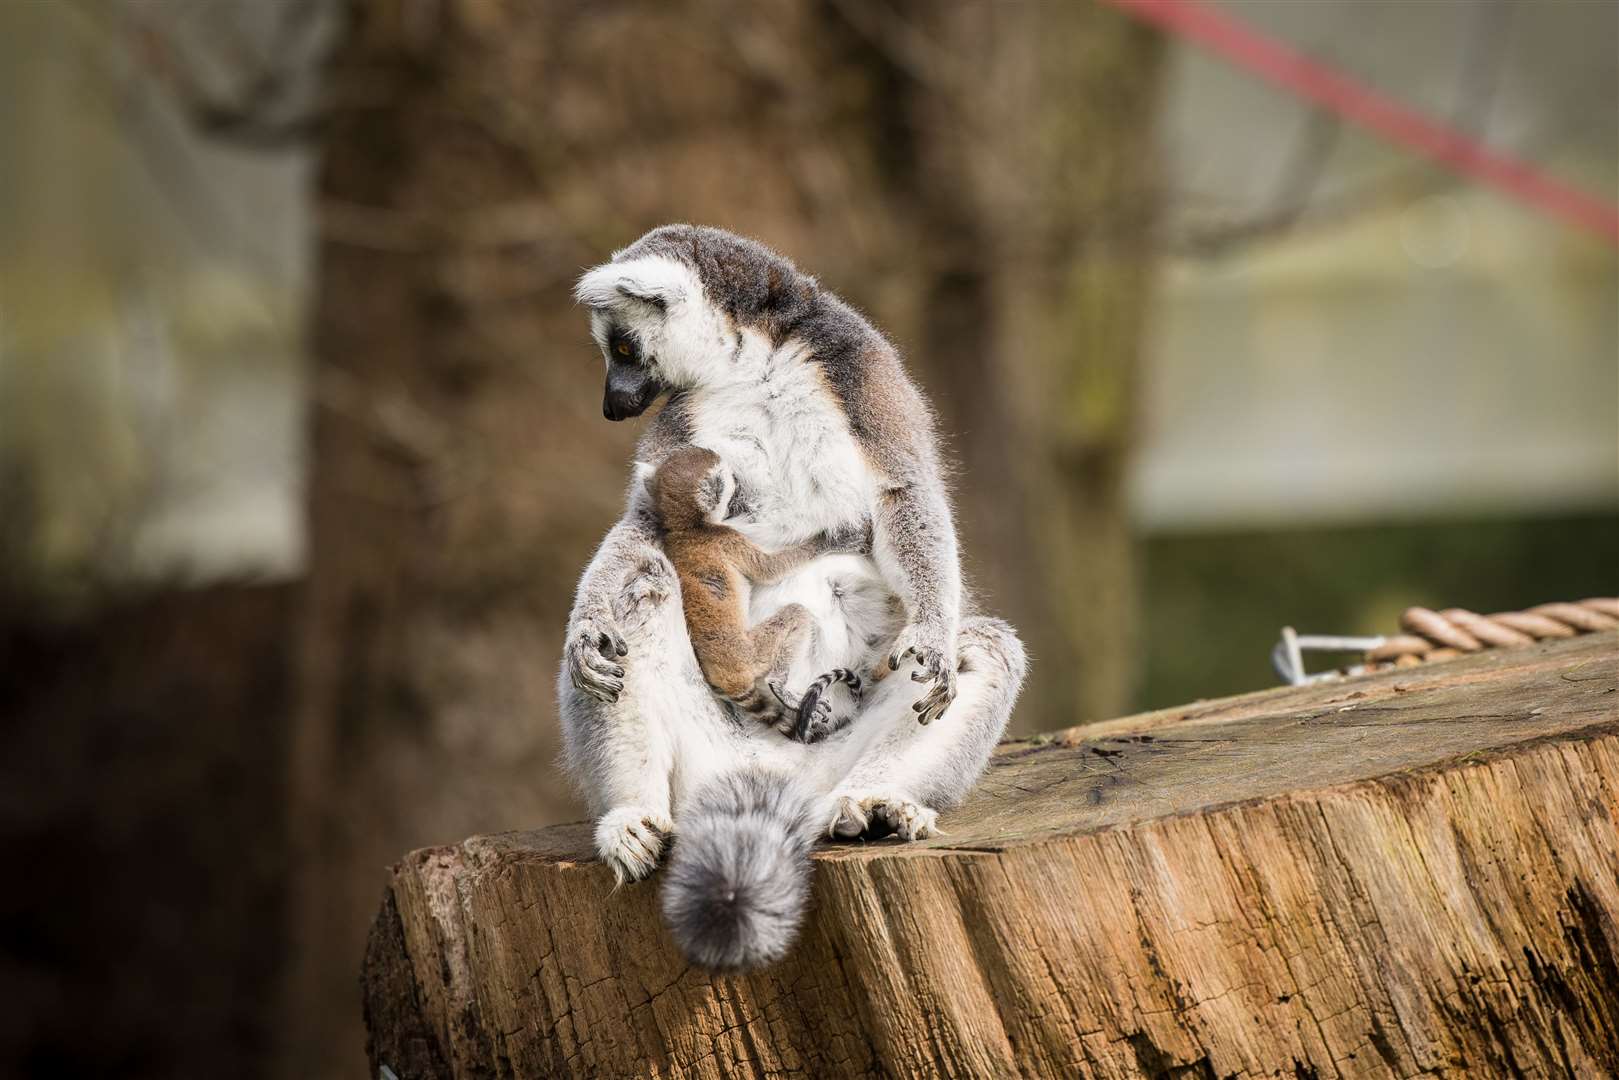 The newborn has been spotted clinging to its mother (Woburn Safari Park/PA)